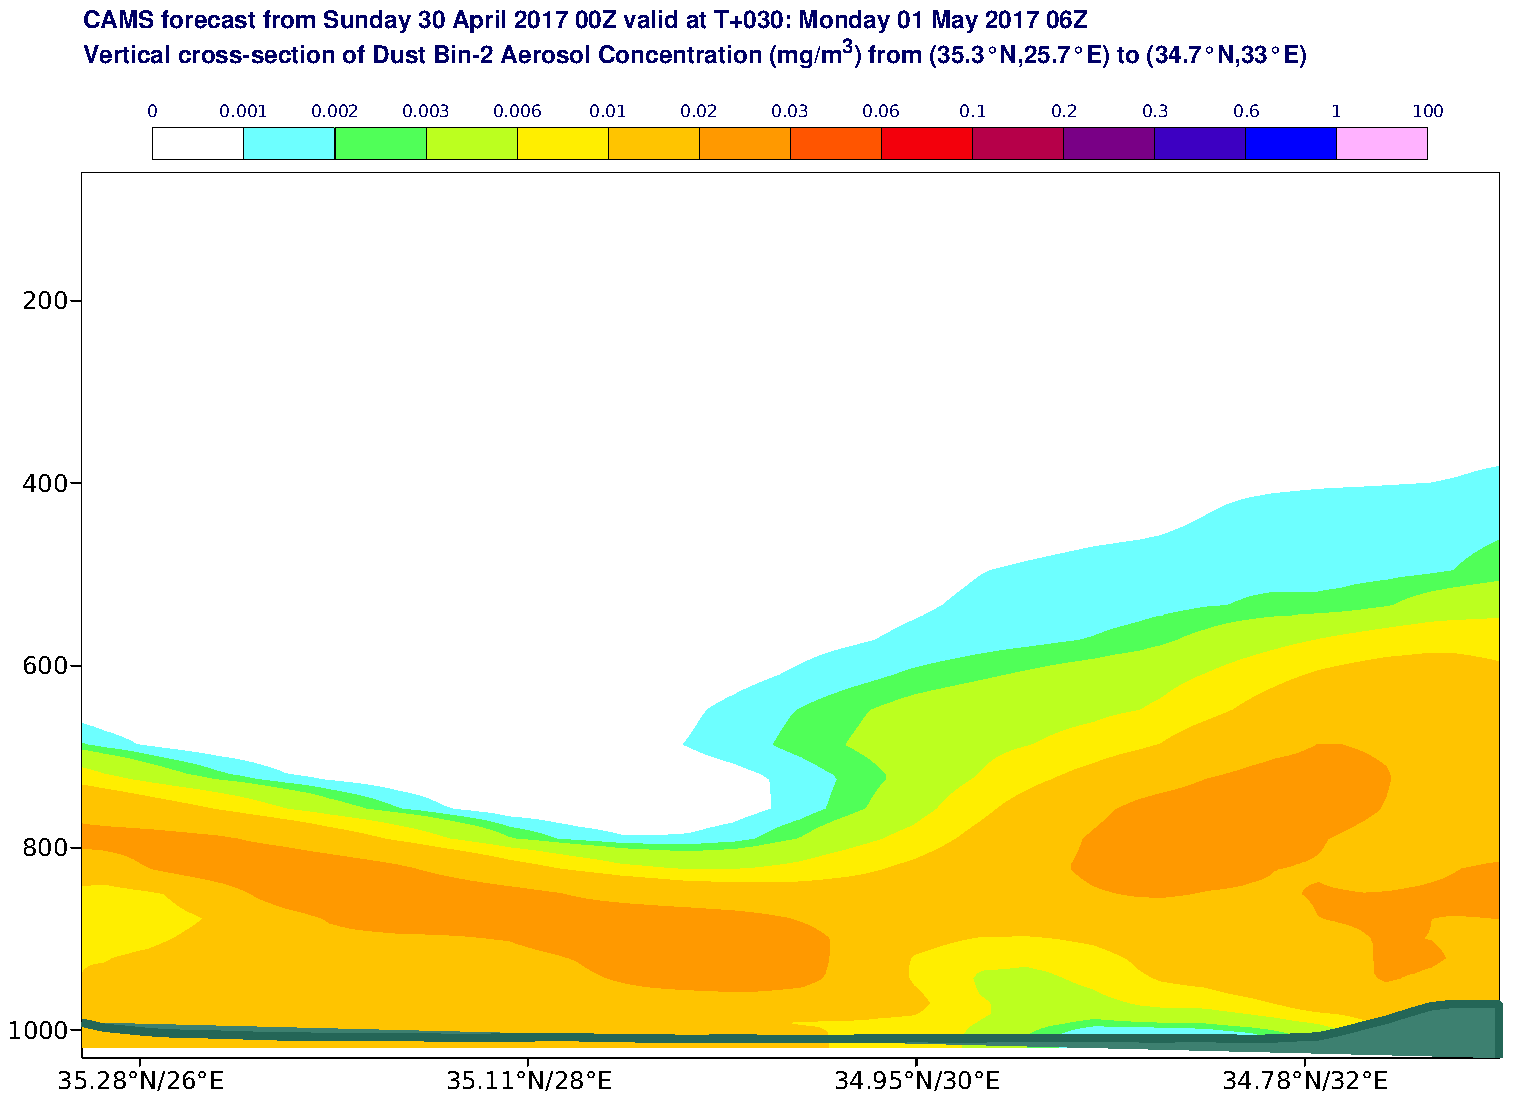 Vertical cross-section of Dust Bin-2 Aerosol Concentration (mg/m3) valid at T30 - 2017-05-01 06:00